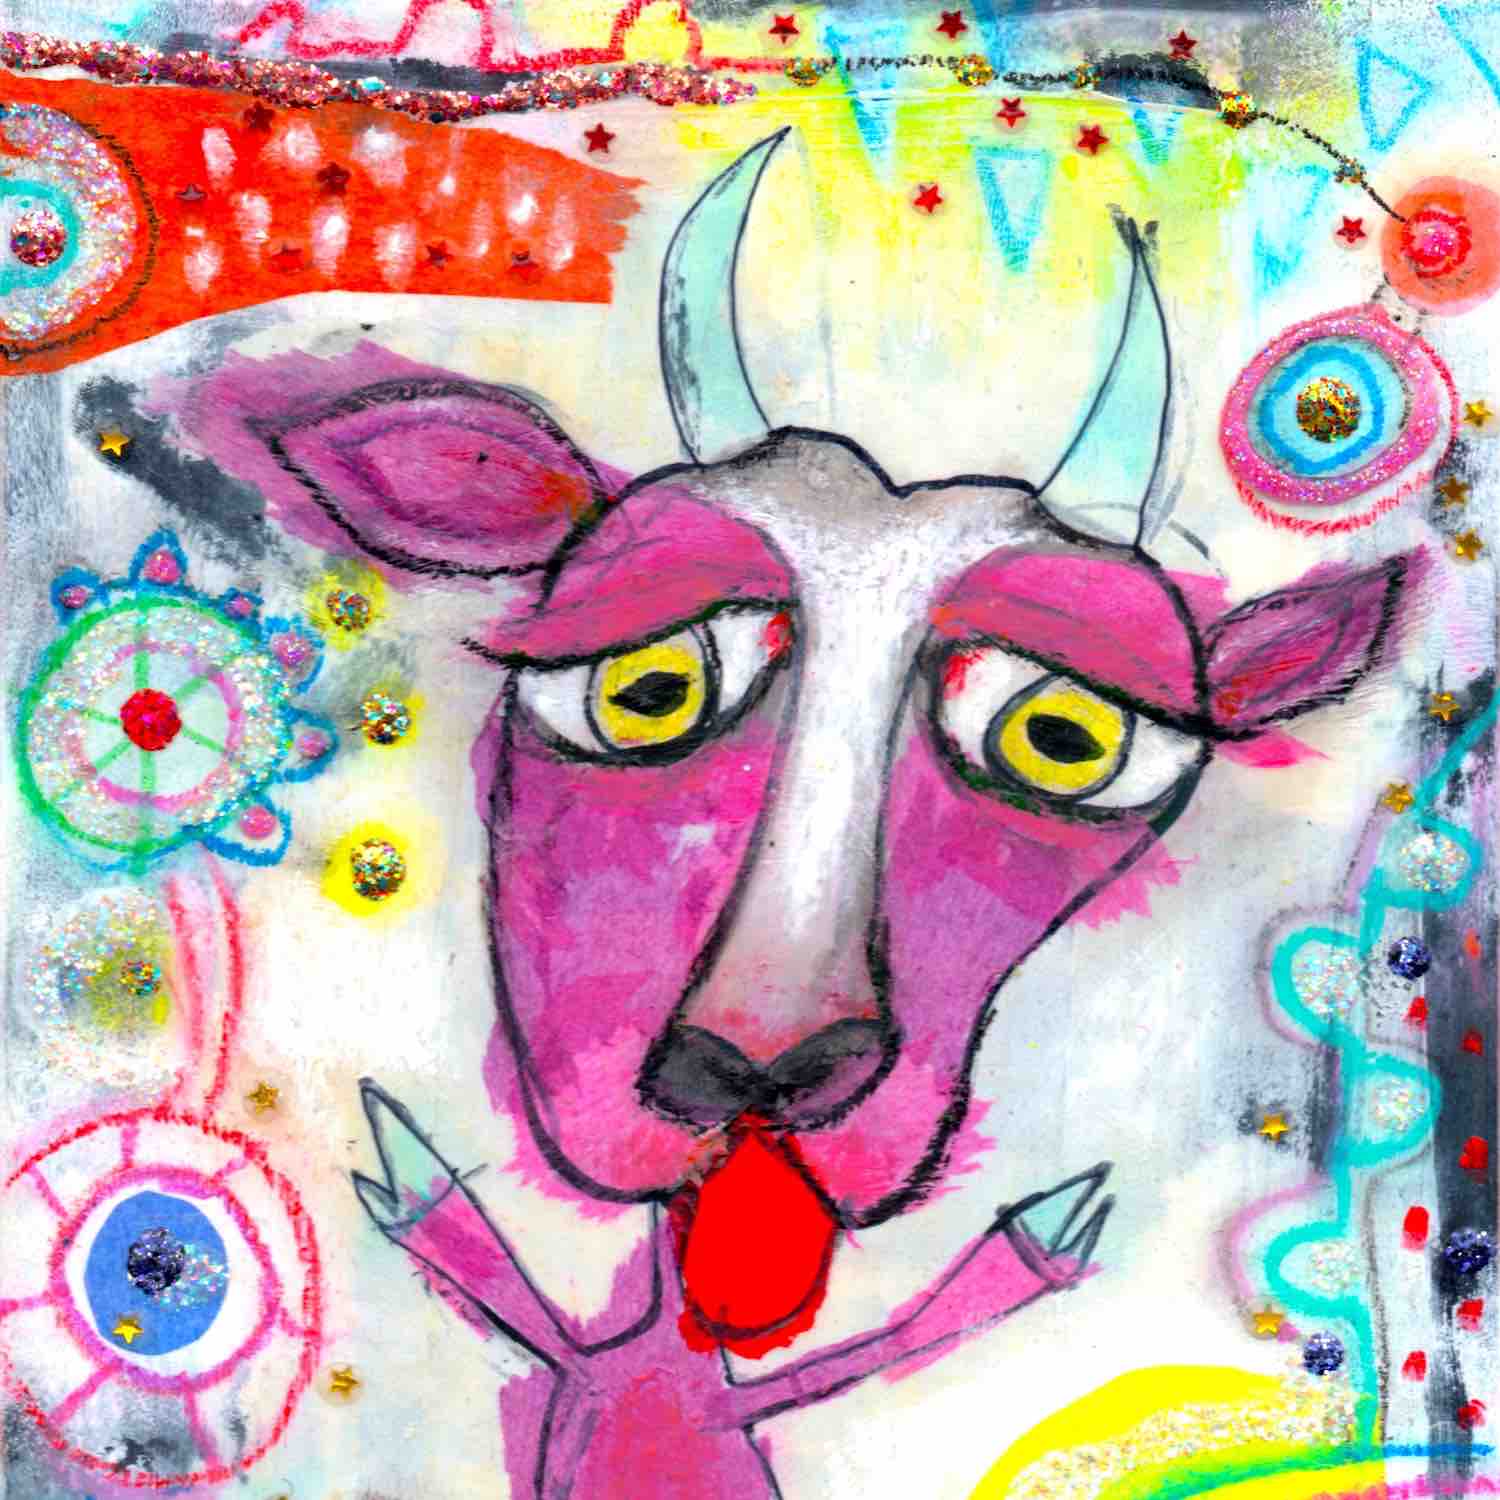 Detail of colorful happy fine art print of a purple goat sticking out tongue on vibrant background. Art poster by Alex Mitchell.